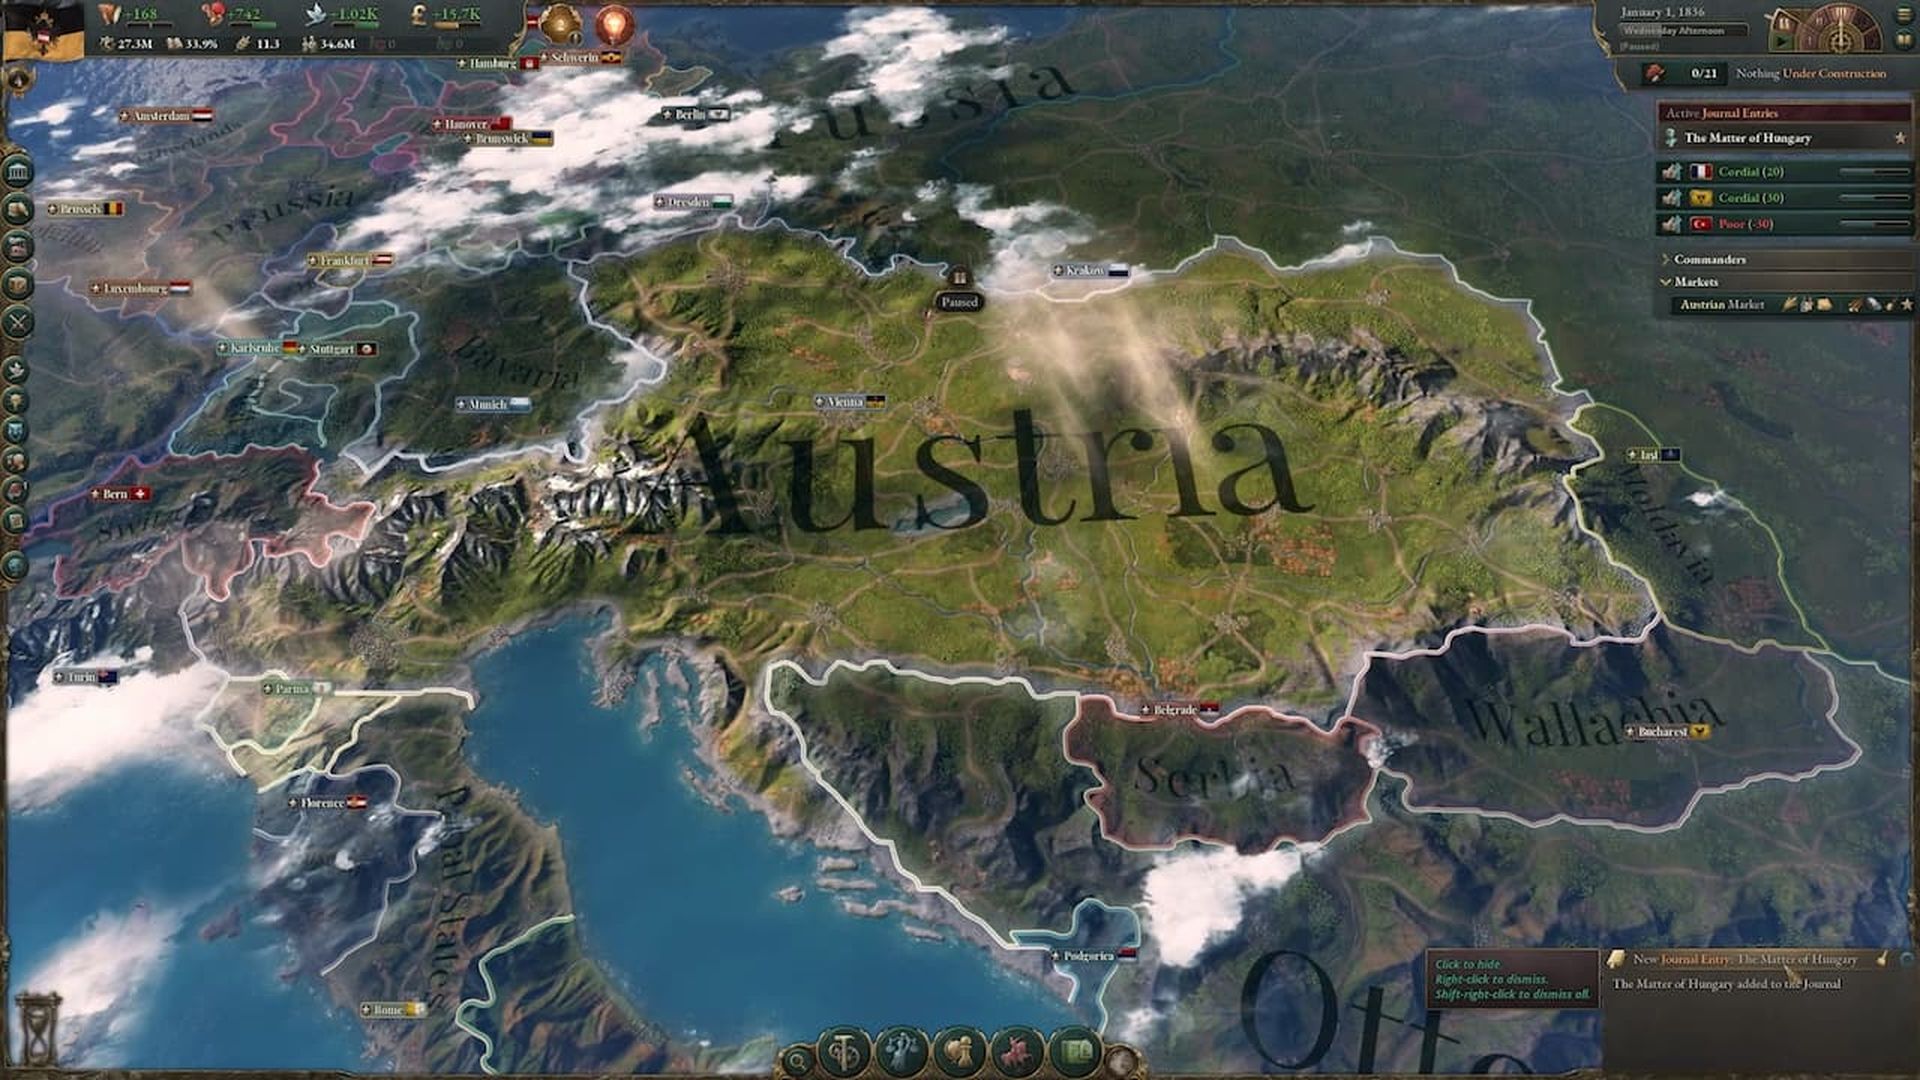 Victoria 3 late game lag: How to fix it?